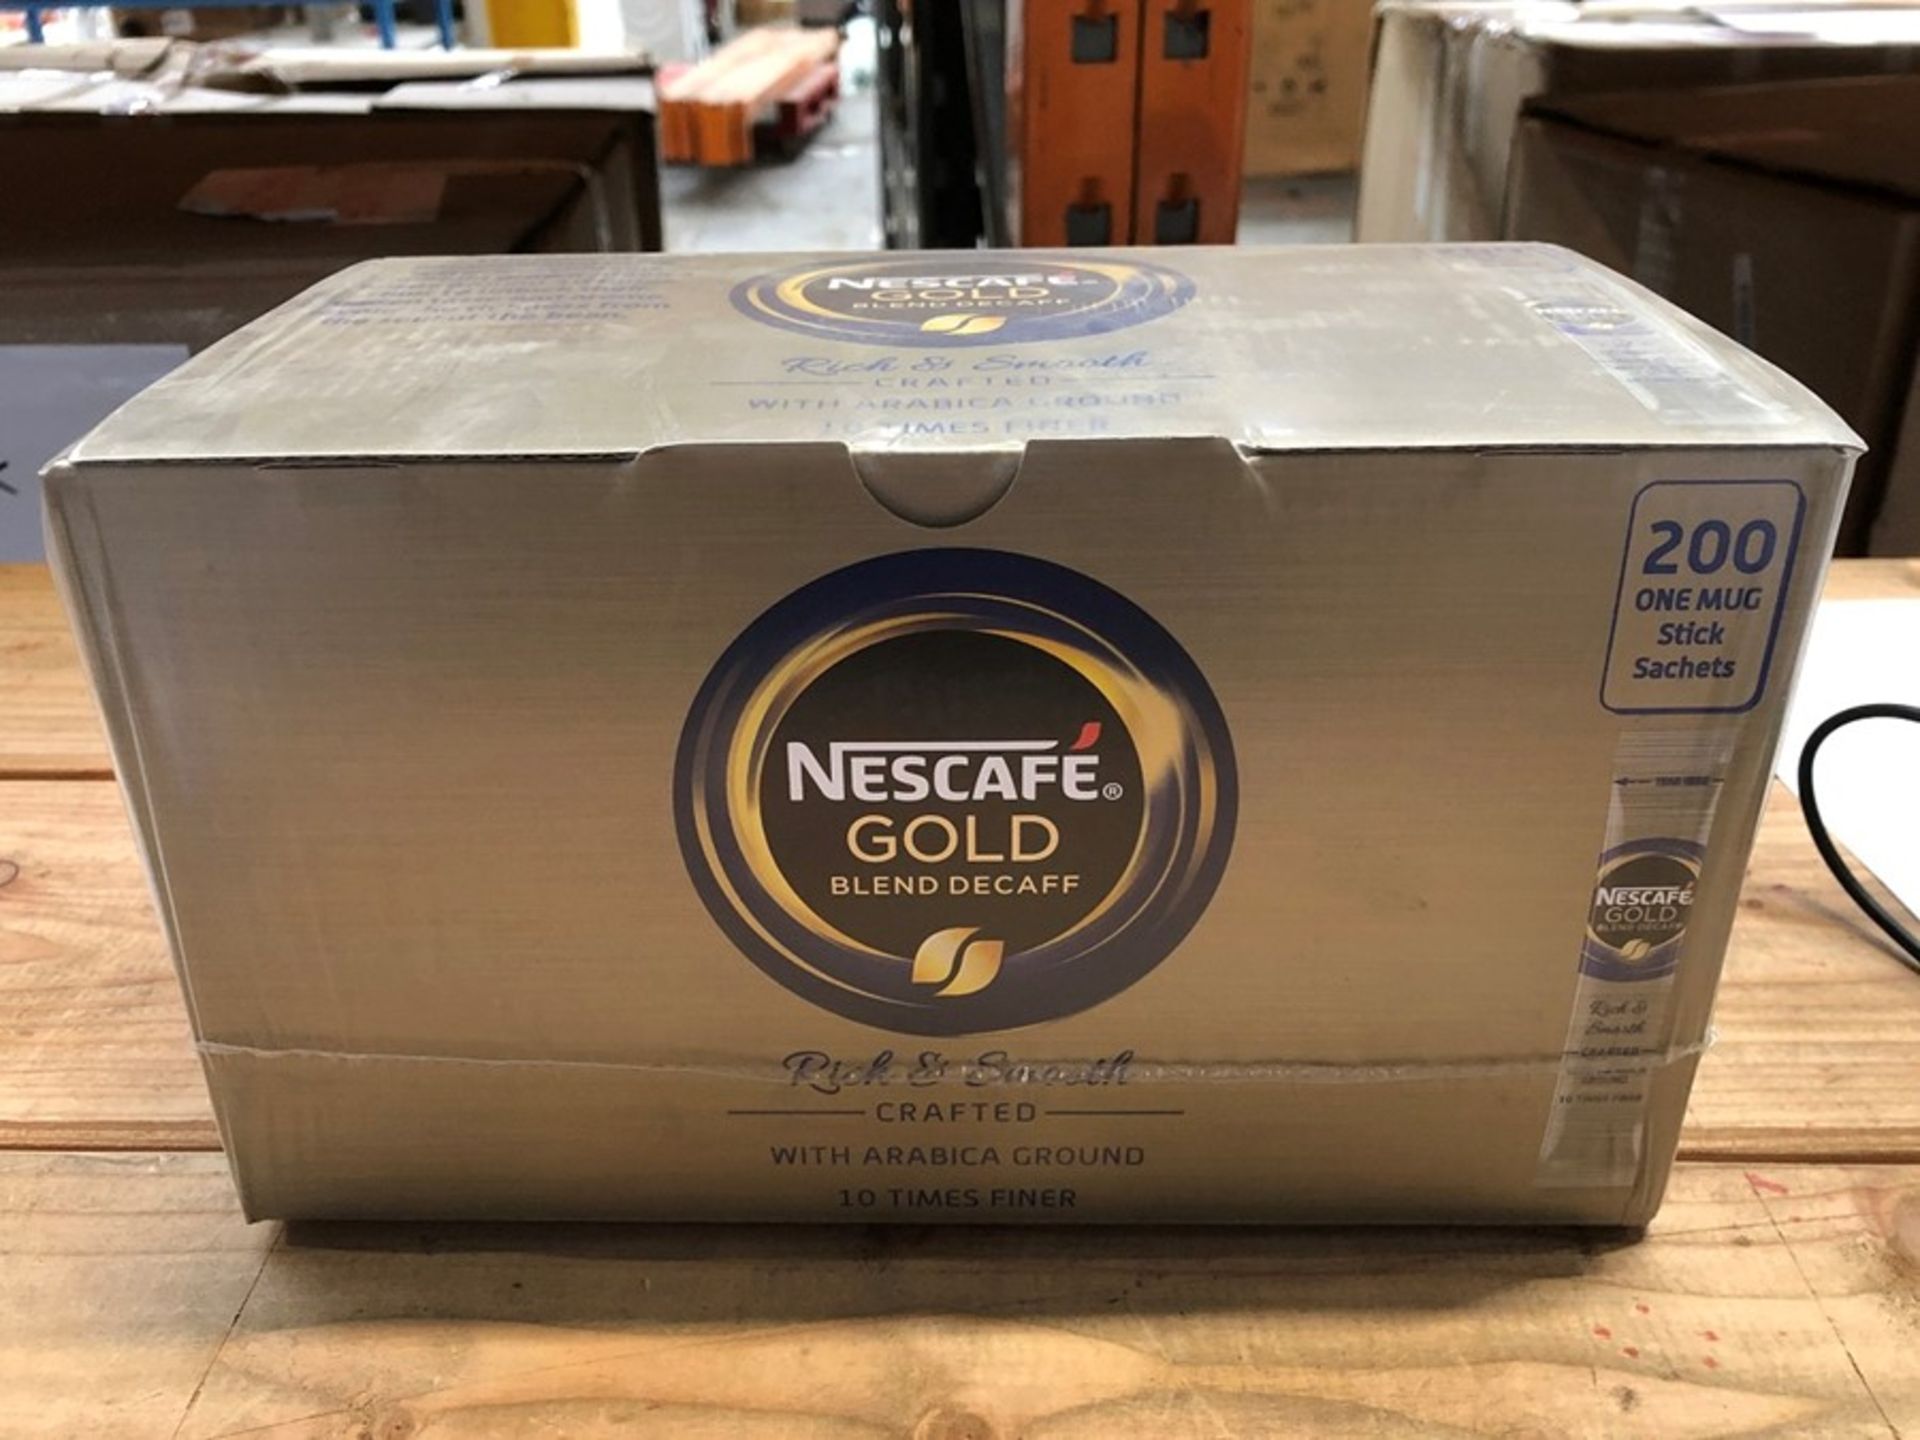 1 LOT TO CONTAIN 2 BOXES OF NESCAFE GOLD BLEND DECAFF ONE CUP COFFEE SACHETS - 200 SACHETS PER BOX /